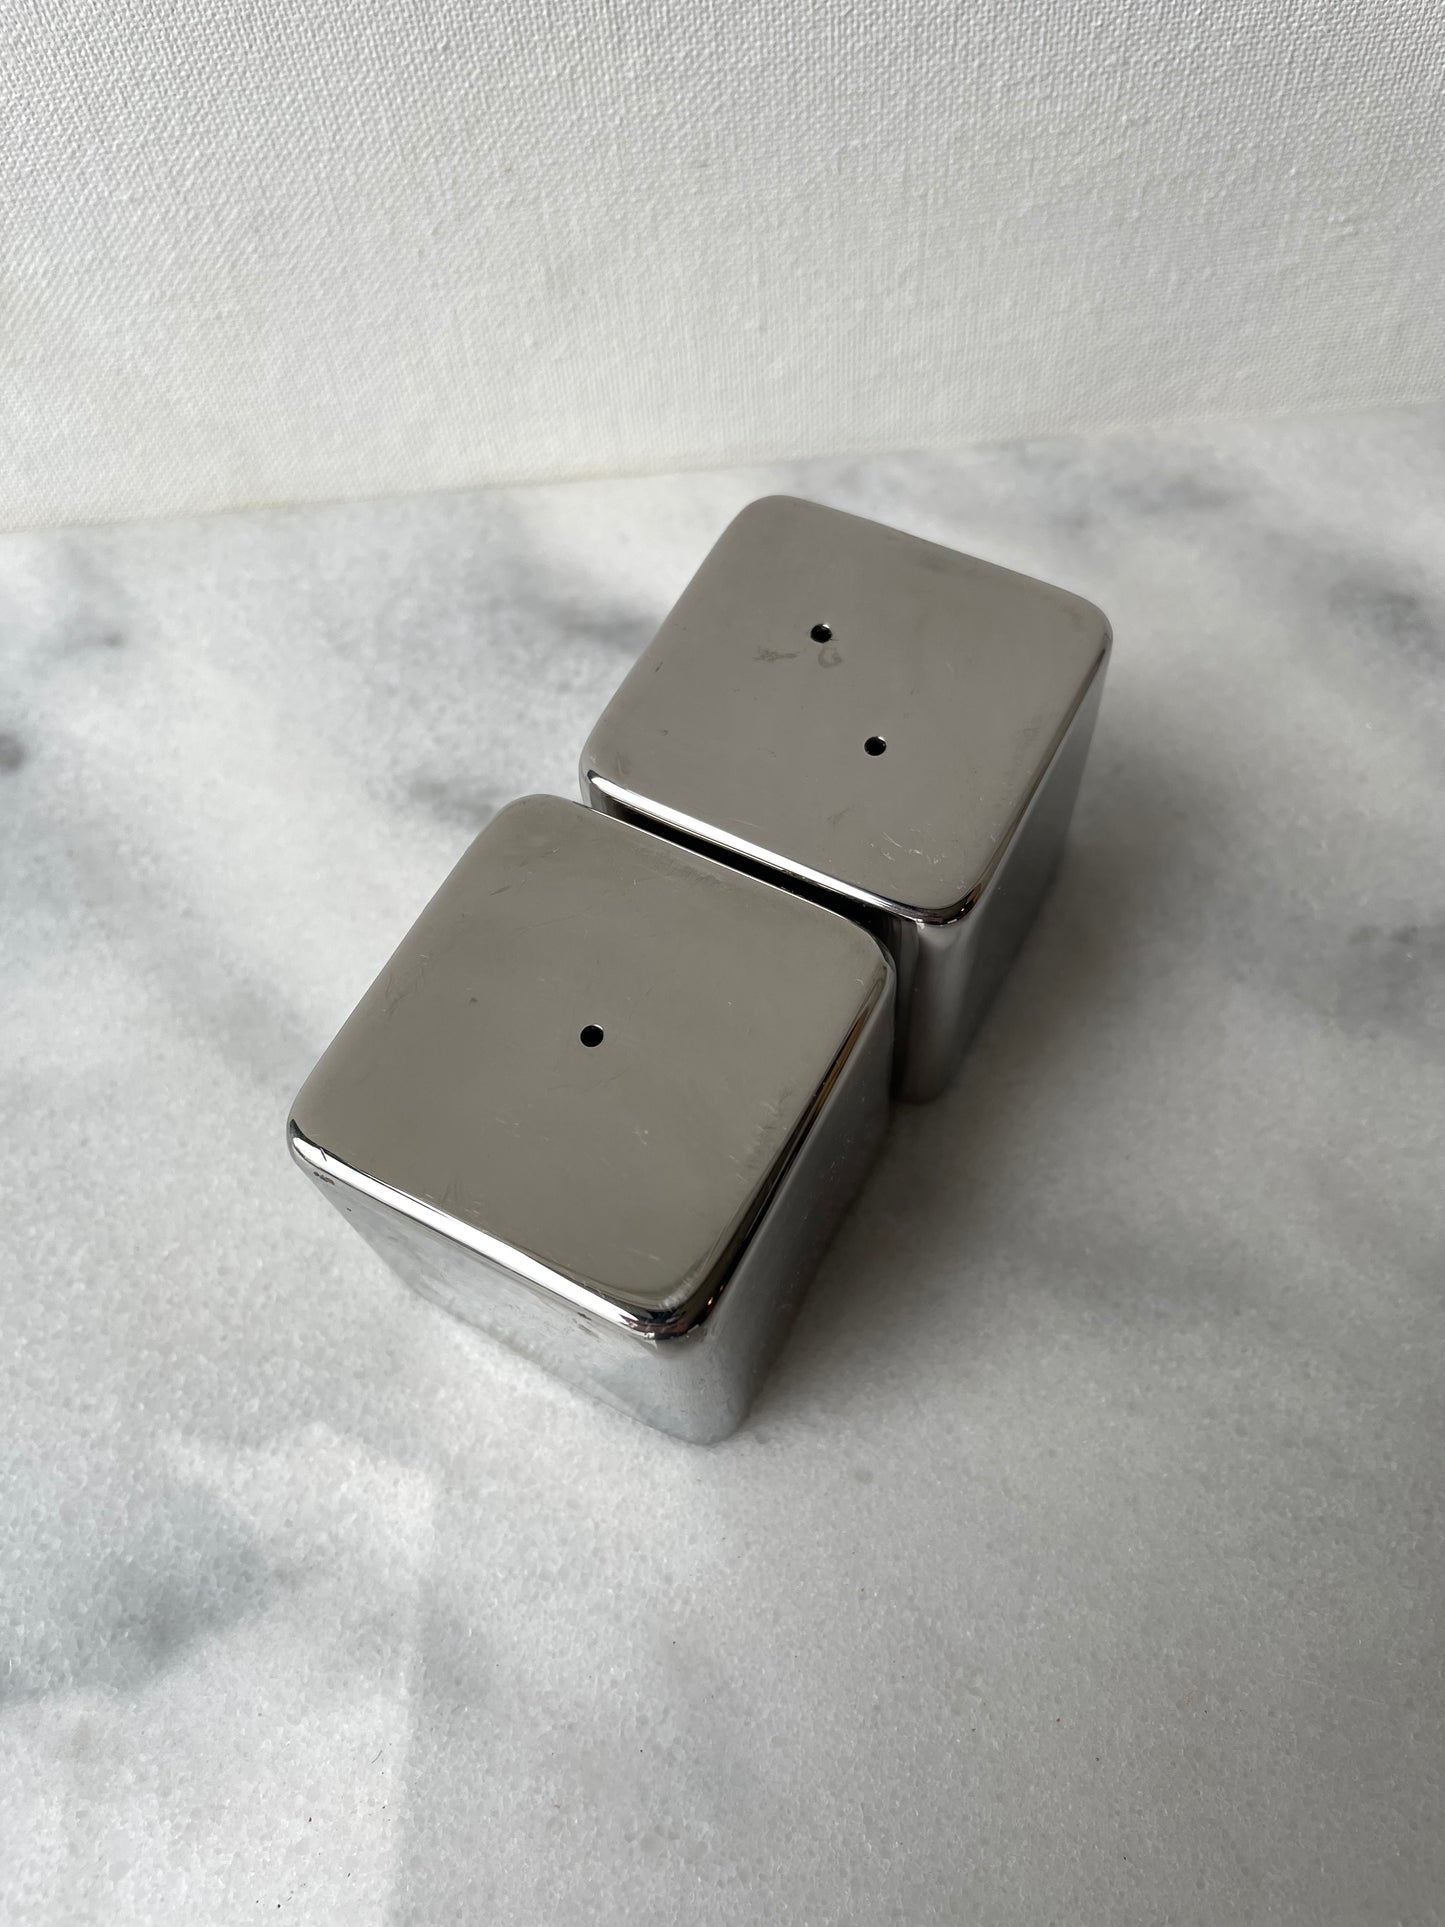 Vintage Modern Mirrored Cube Salt and Pepper Shakers